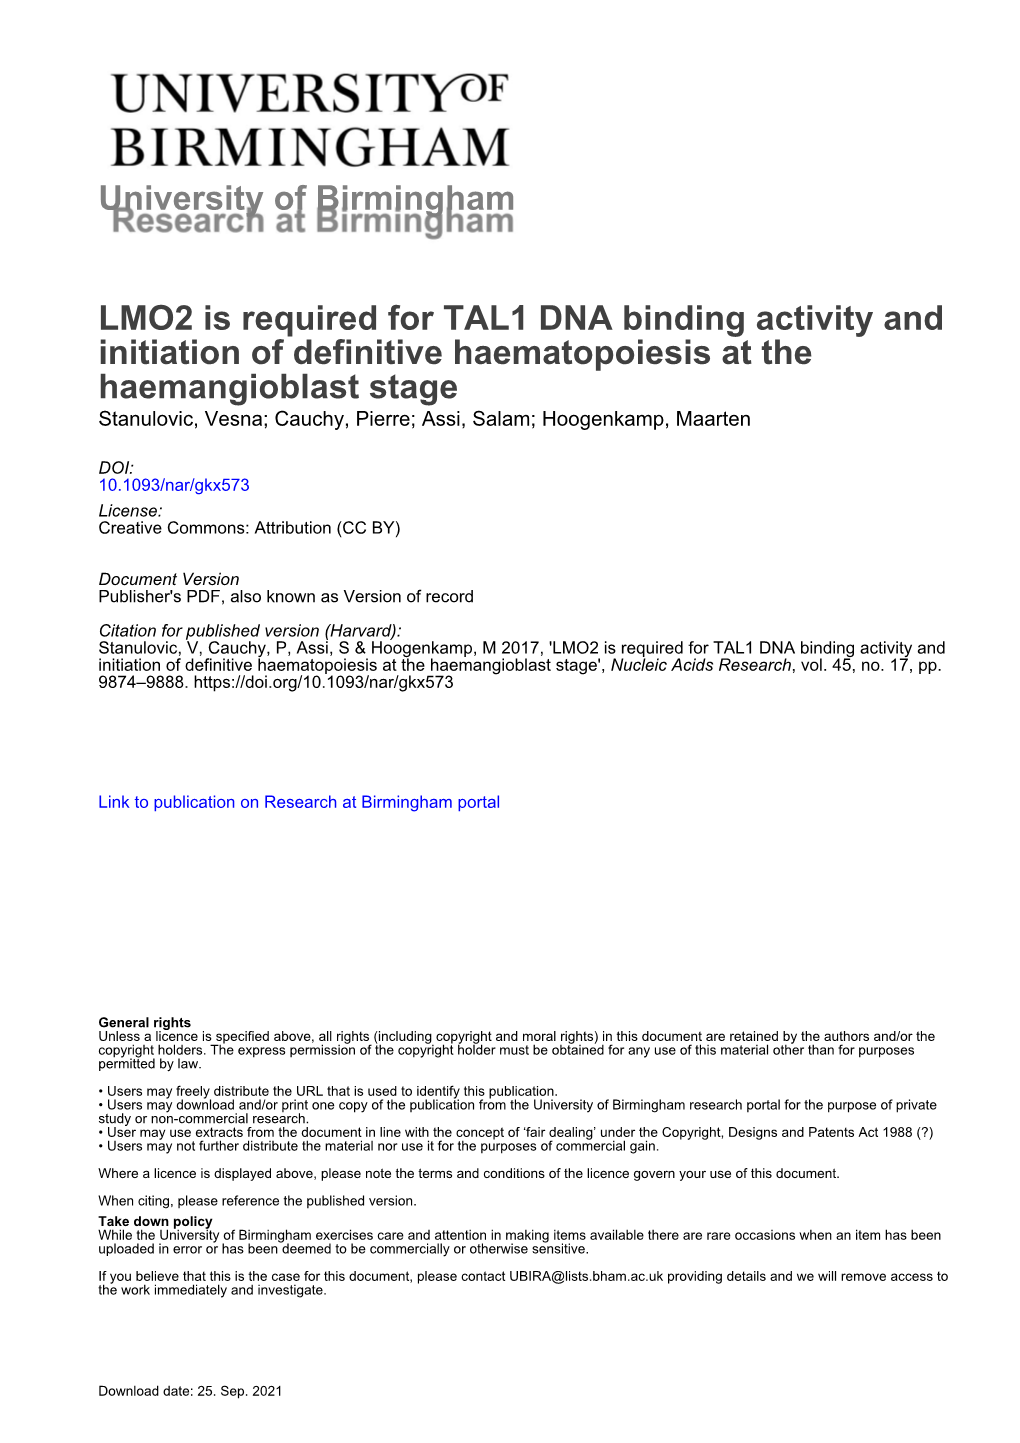 University of Birmingham LMO2 Is Required for TAL1 DNA